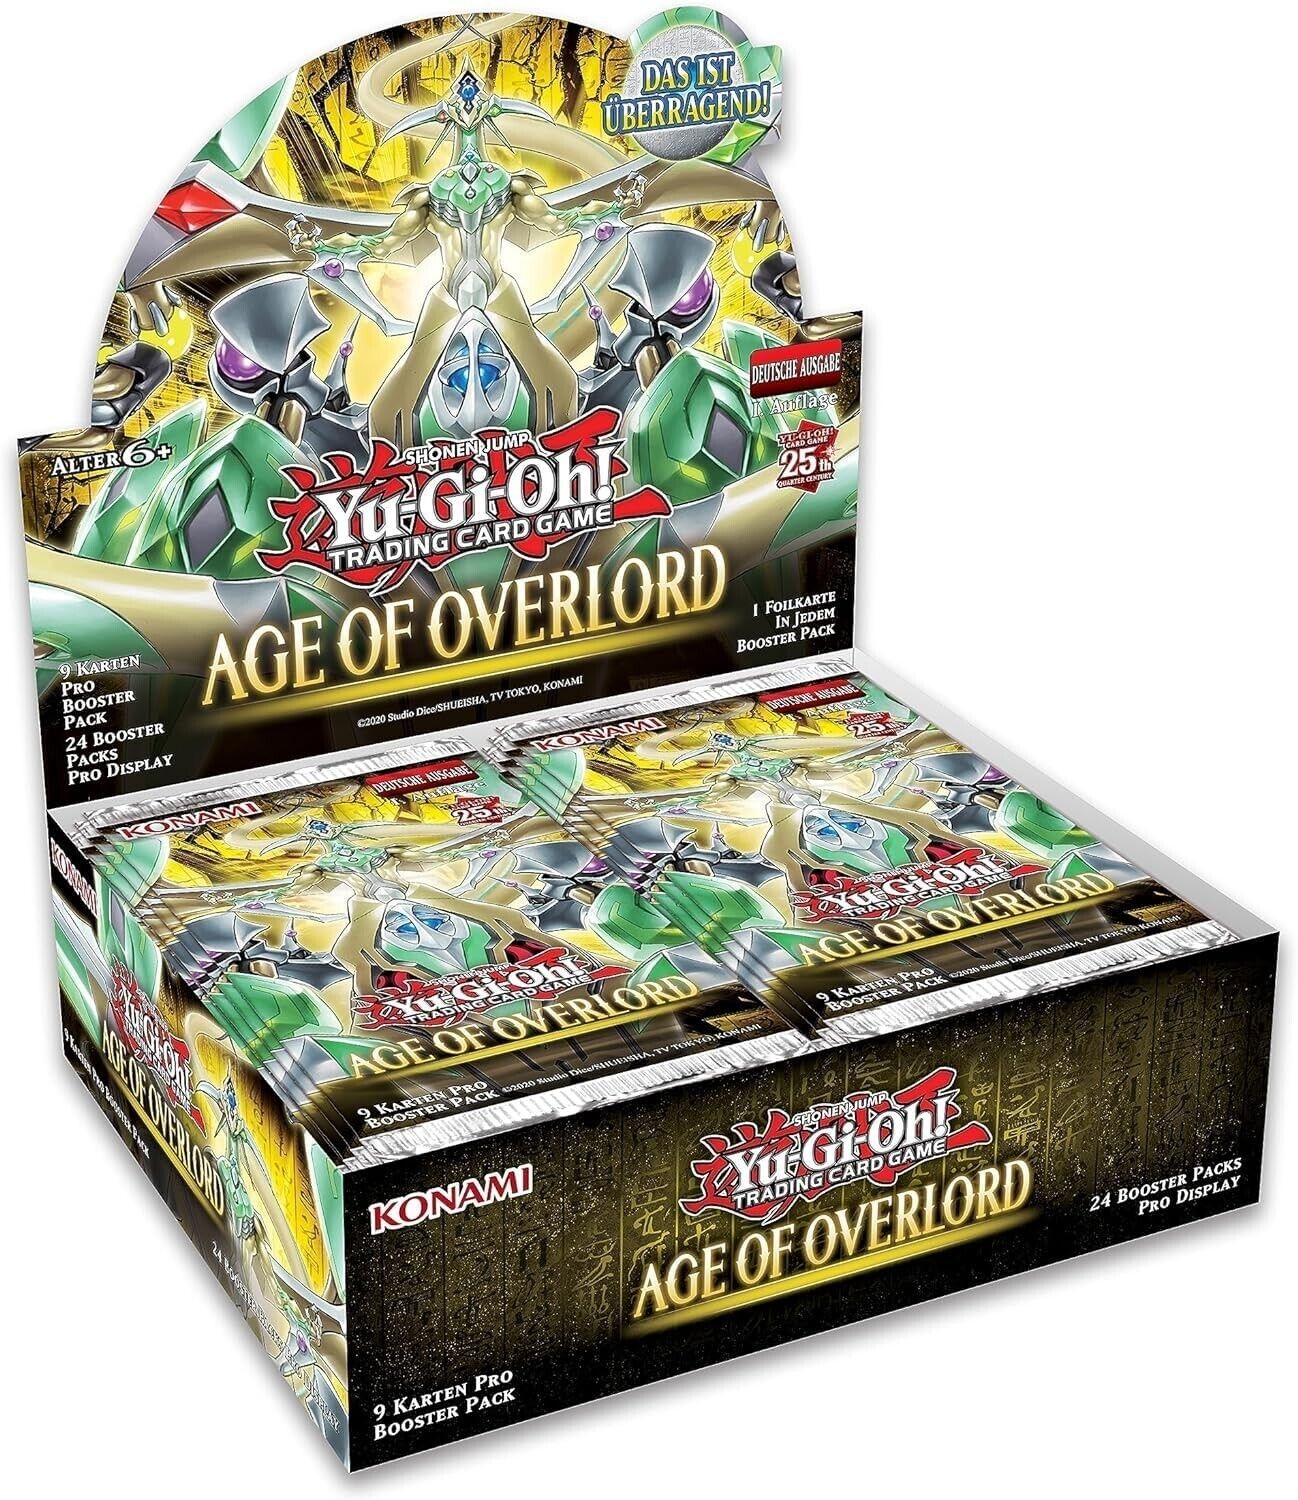 Yu-Gi-Oh! TCG Age of Overlord Booster Box